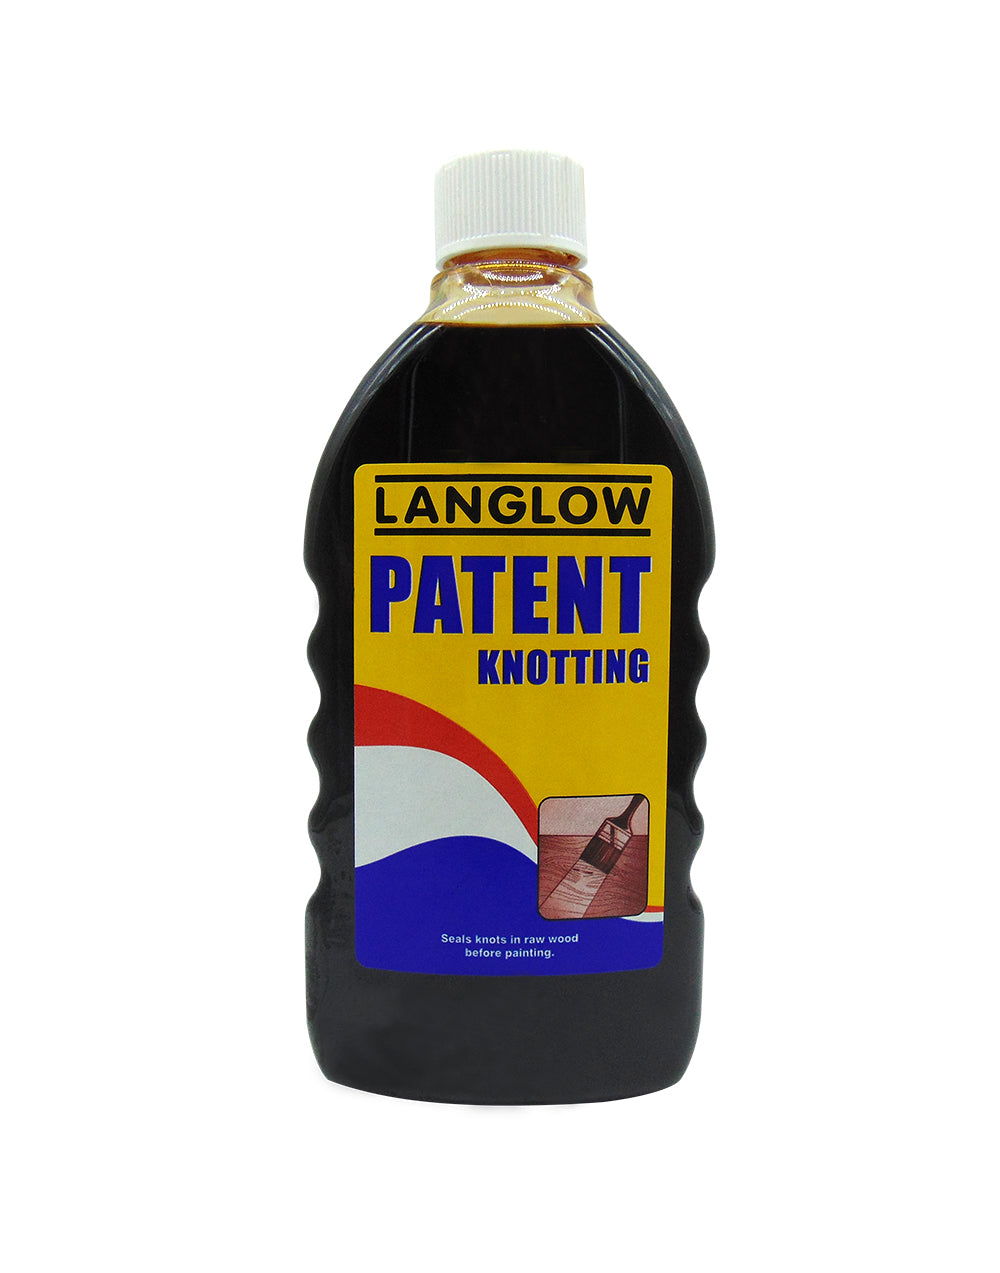 Palace LANGLOW Patent Knotting Solution | Alcohol Based Resin Solution